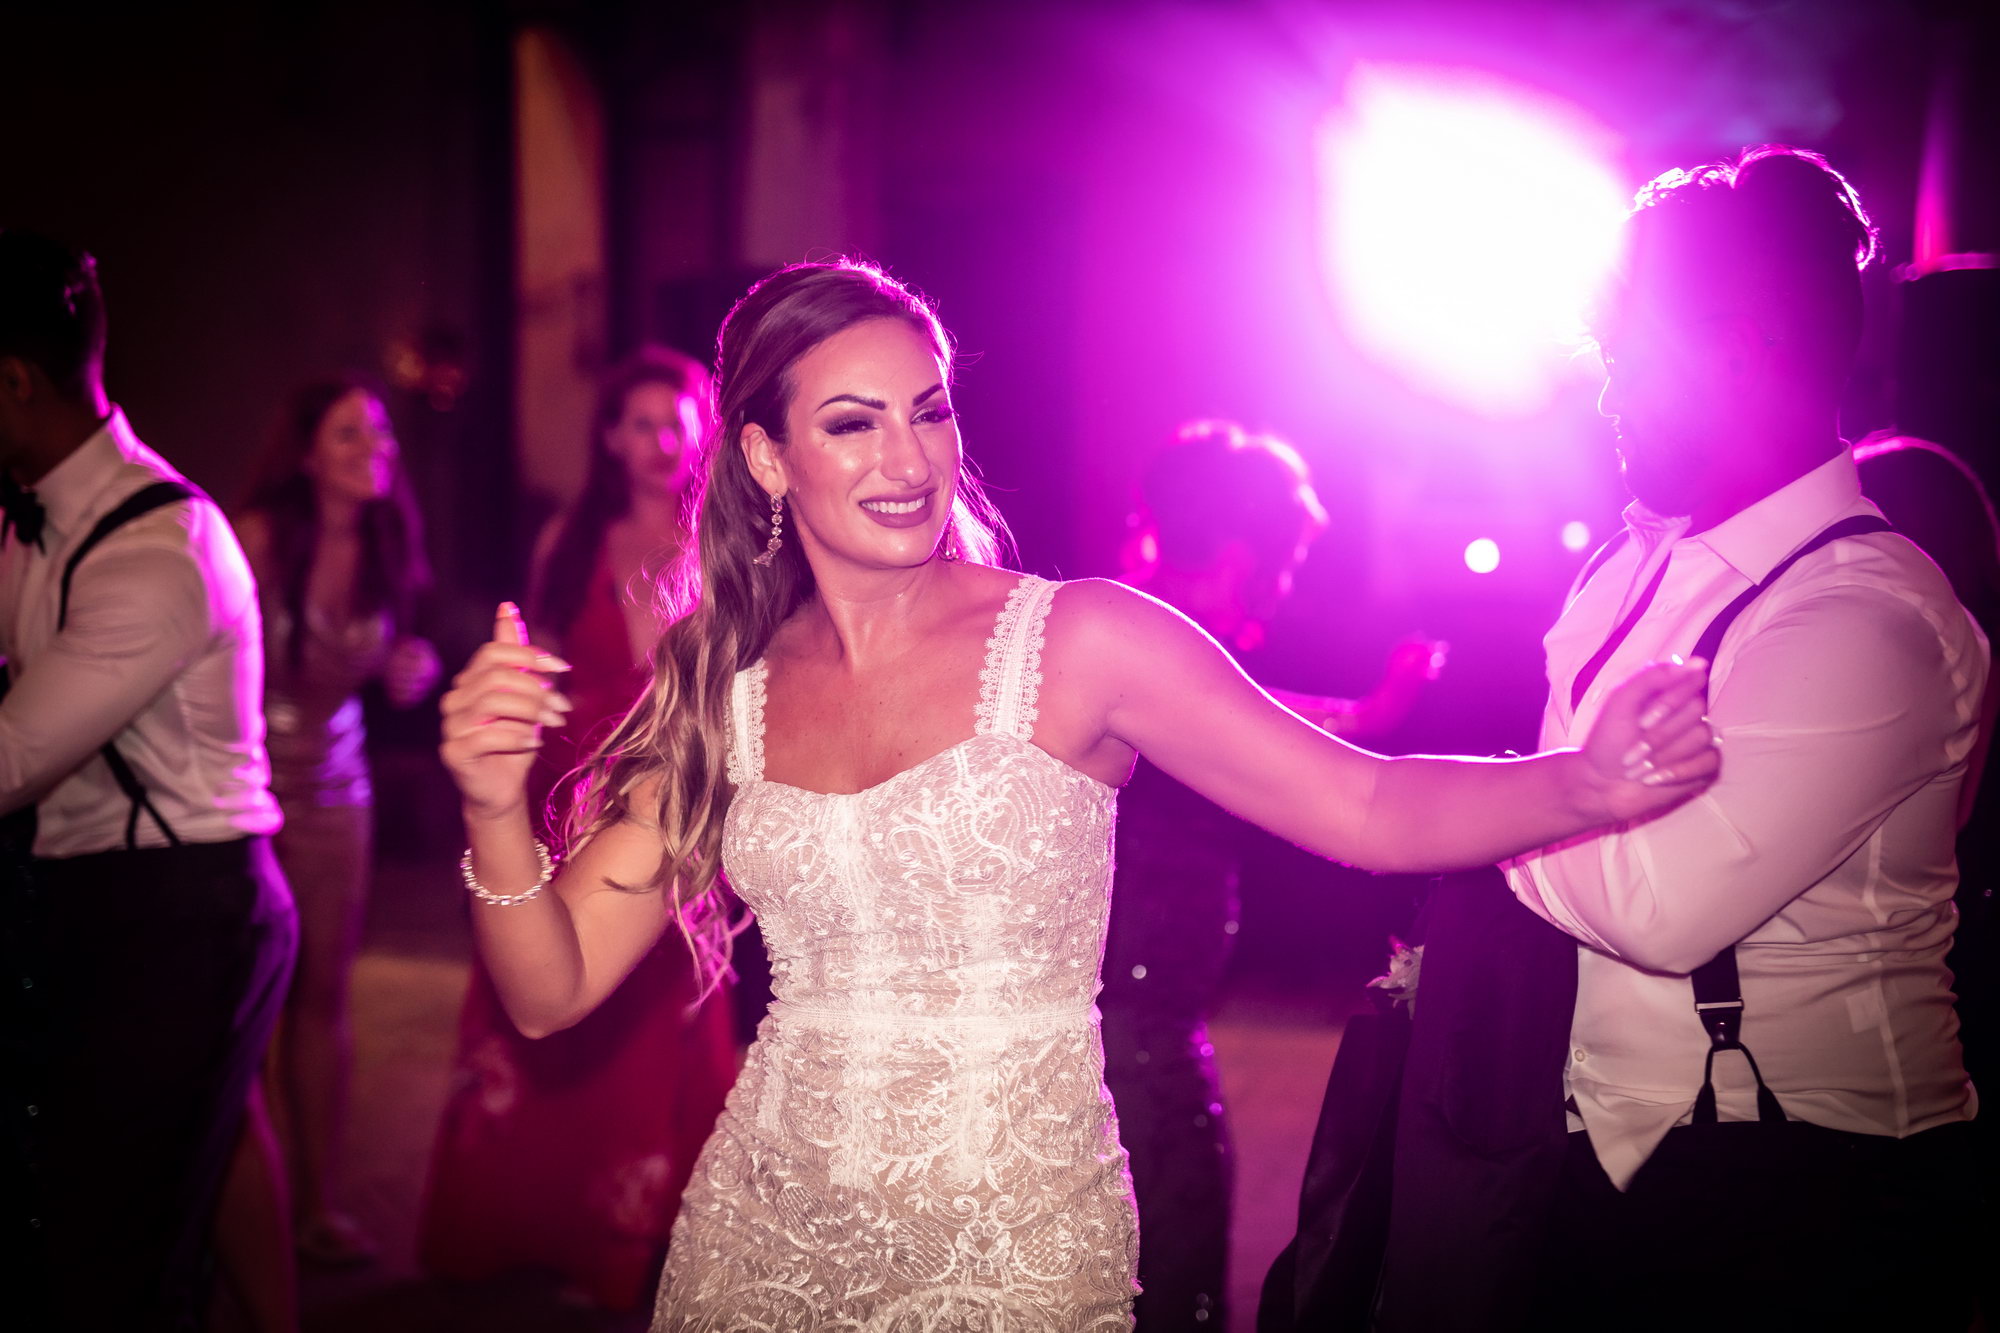 ..imagesweddings enthe dream of getting married in Italy wedding photographers photo27_063 by Photo27